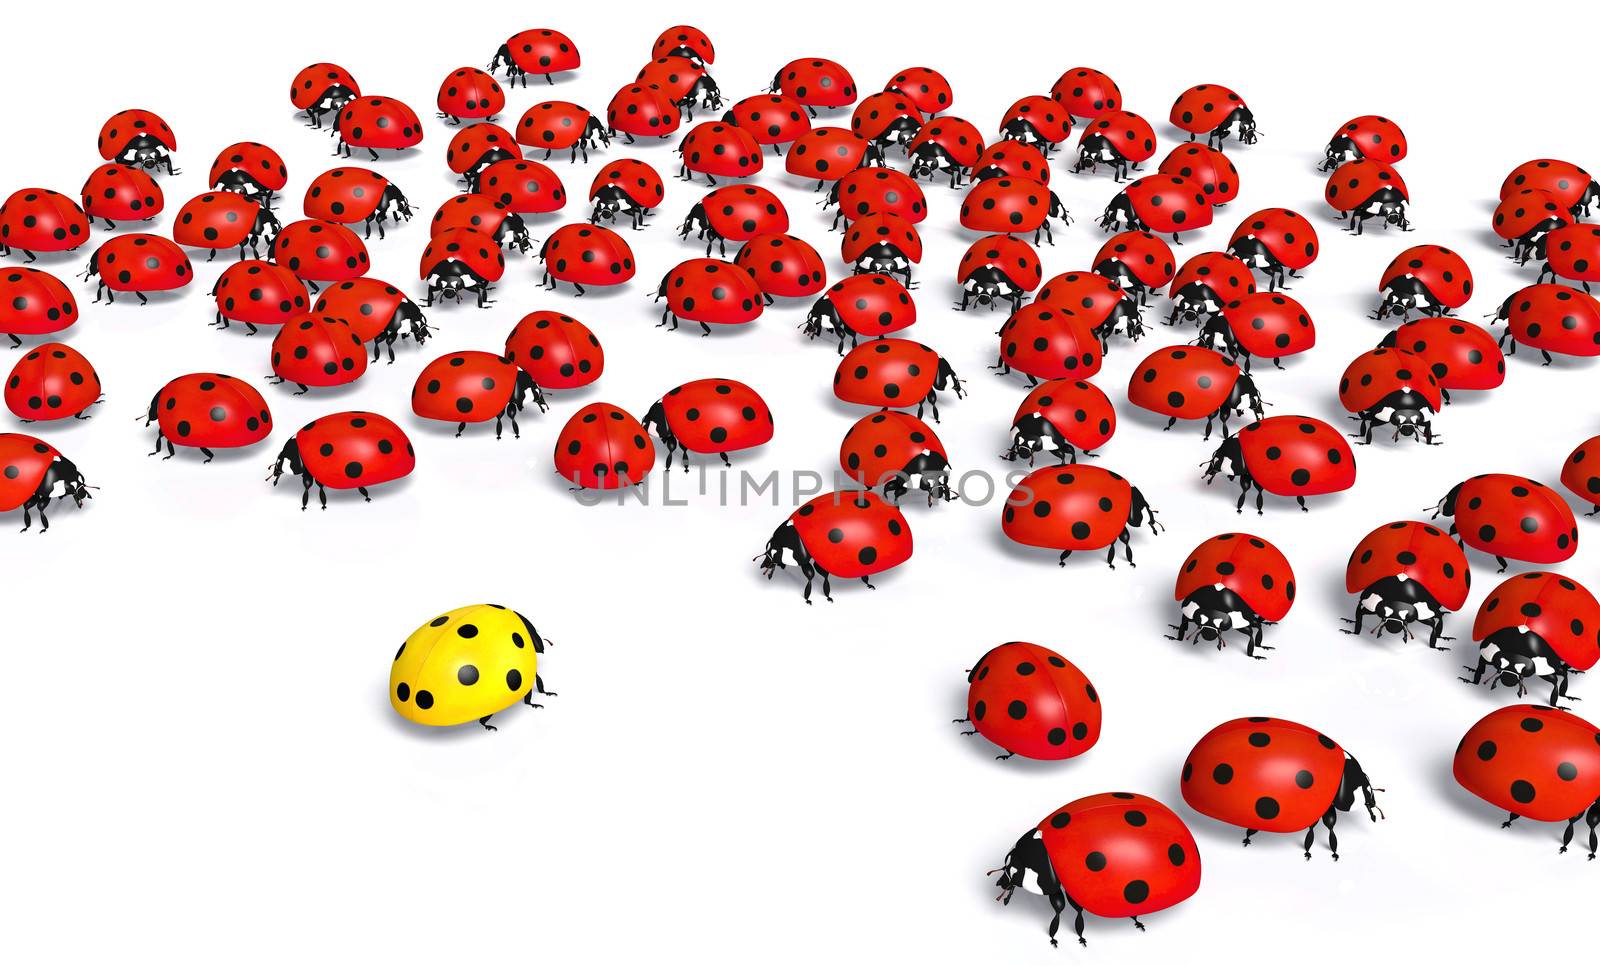 crowd of red ladybugs marginalize a yellow one taking distance from it, on a white background